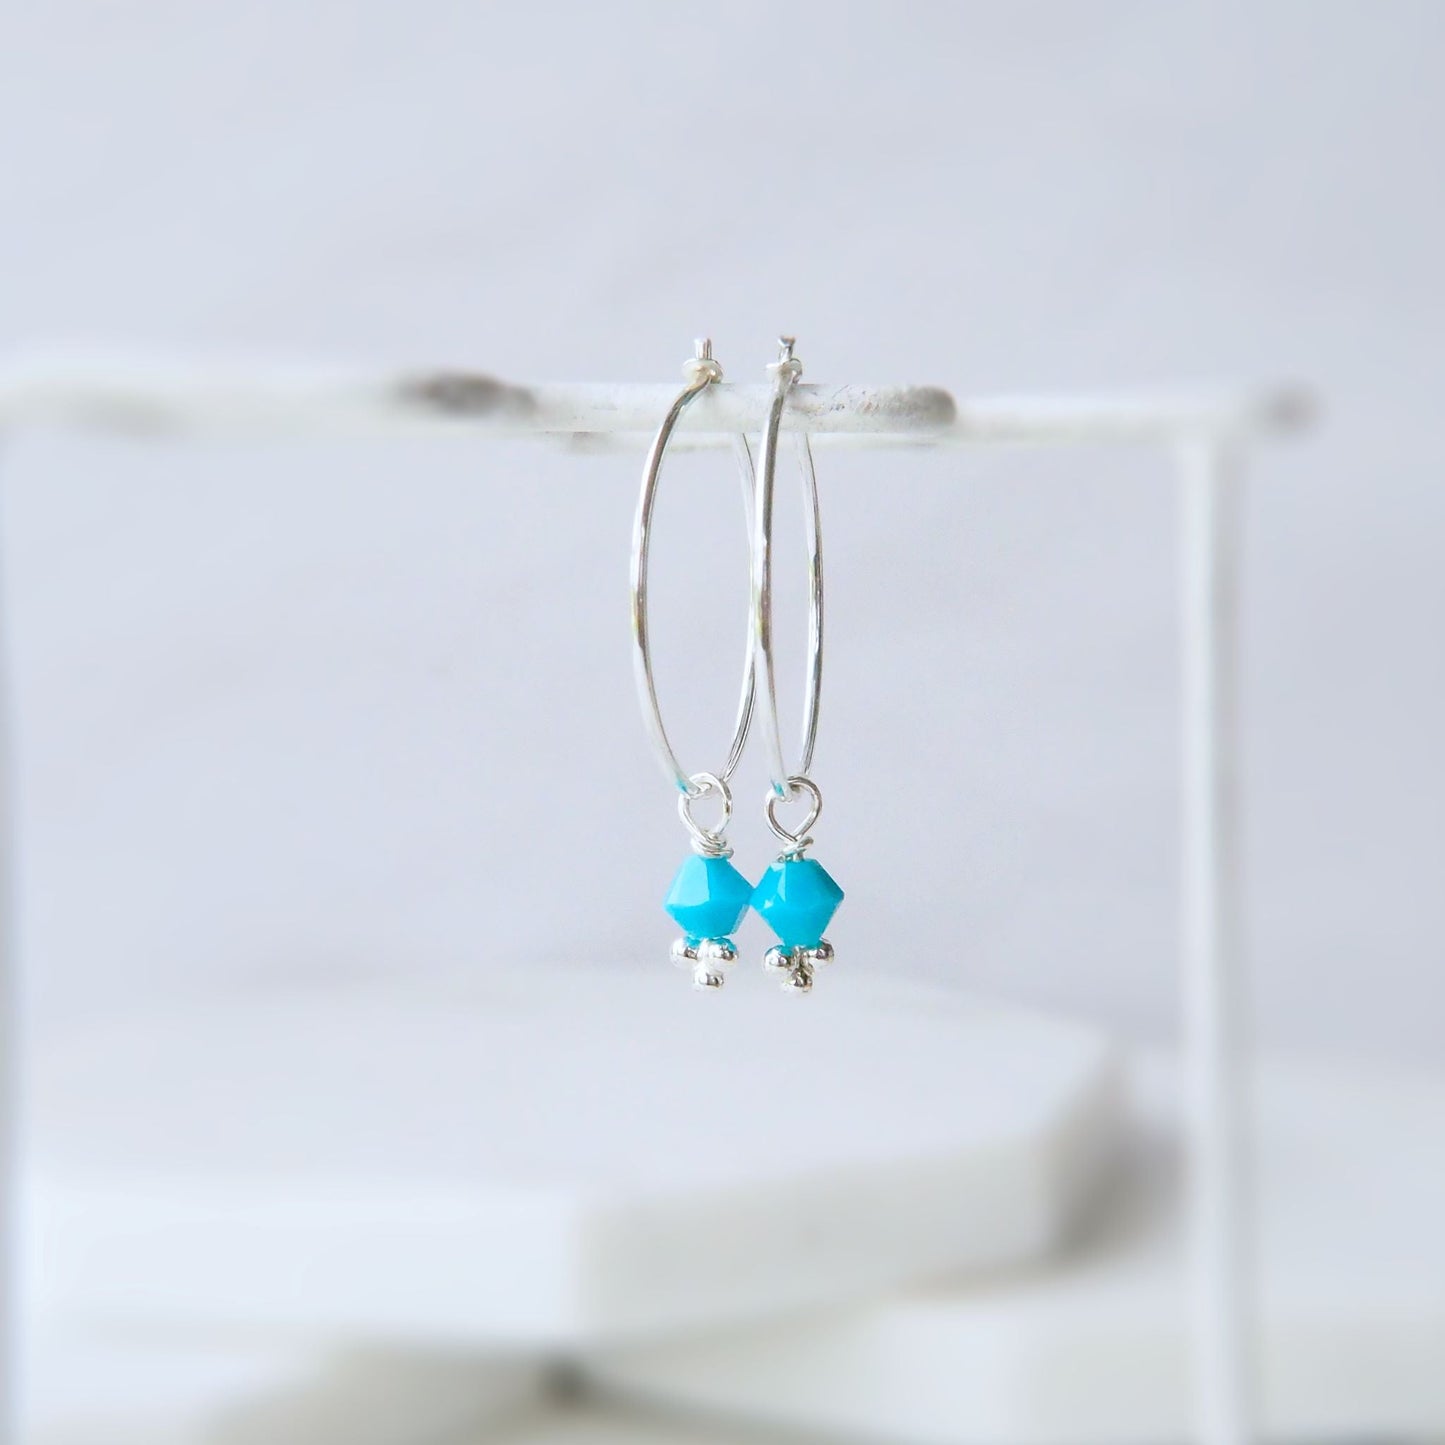 Sterling Silver boho thin hoops with turquoise crystal bicone dropper in December Birthstone. Pictured hanging from a white jewellery rail on a white background. Jewellery Handmade in Edinburgh UK by maram jewellery